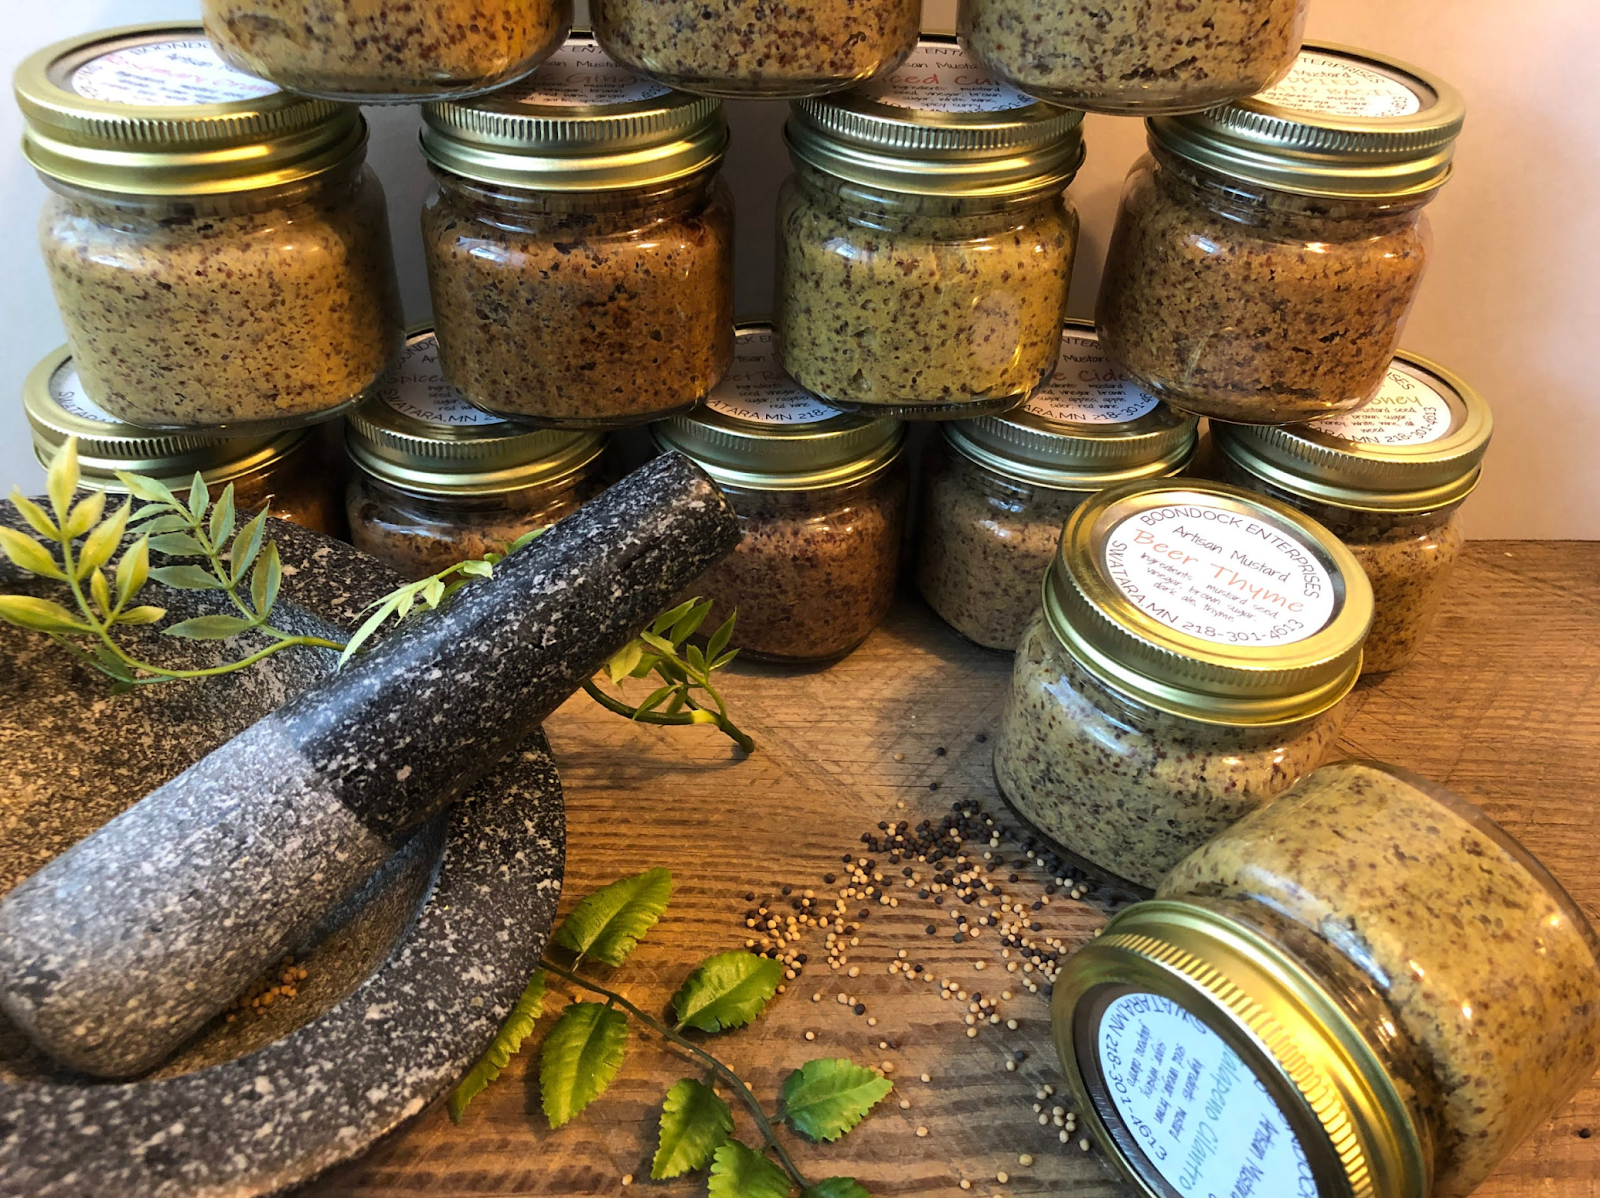 several jars of artisanal mustard with mortar and pestle in the foreground